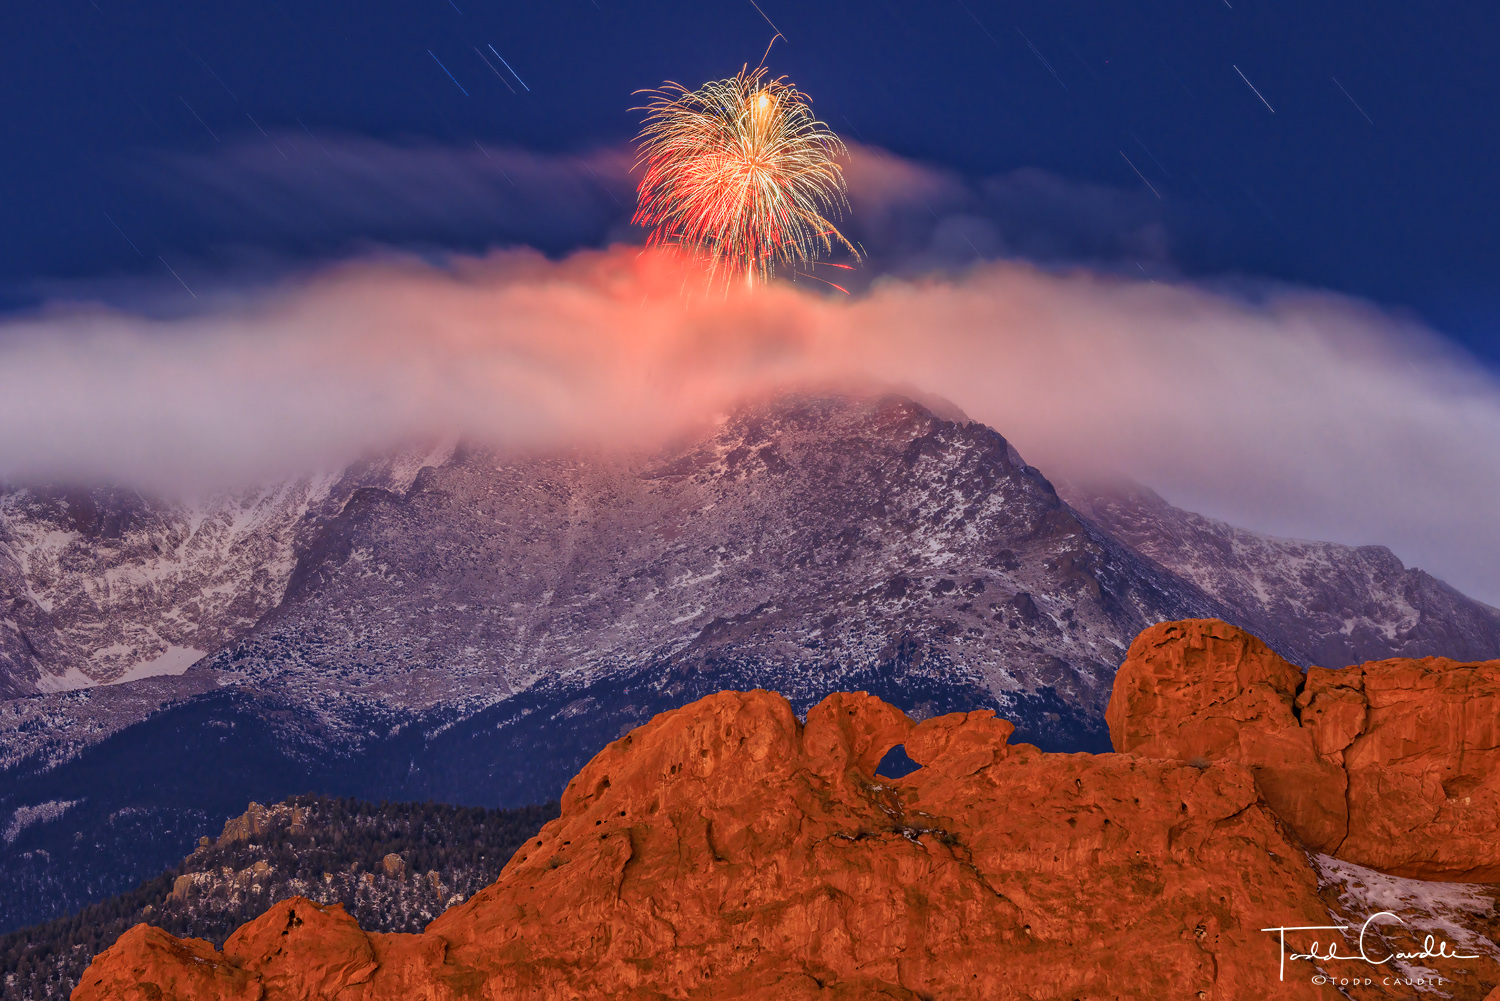 The AdAmAn Club fires celebratory projectiles off the summit of Pikes Peak to greet the New Year, with Kissing Camels in Garden...